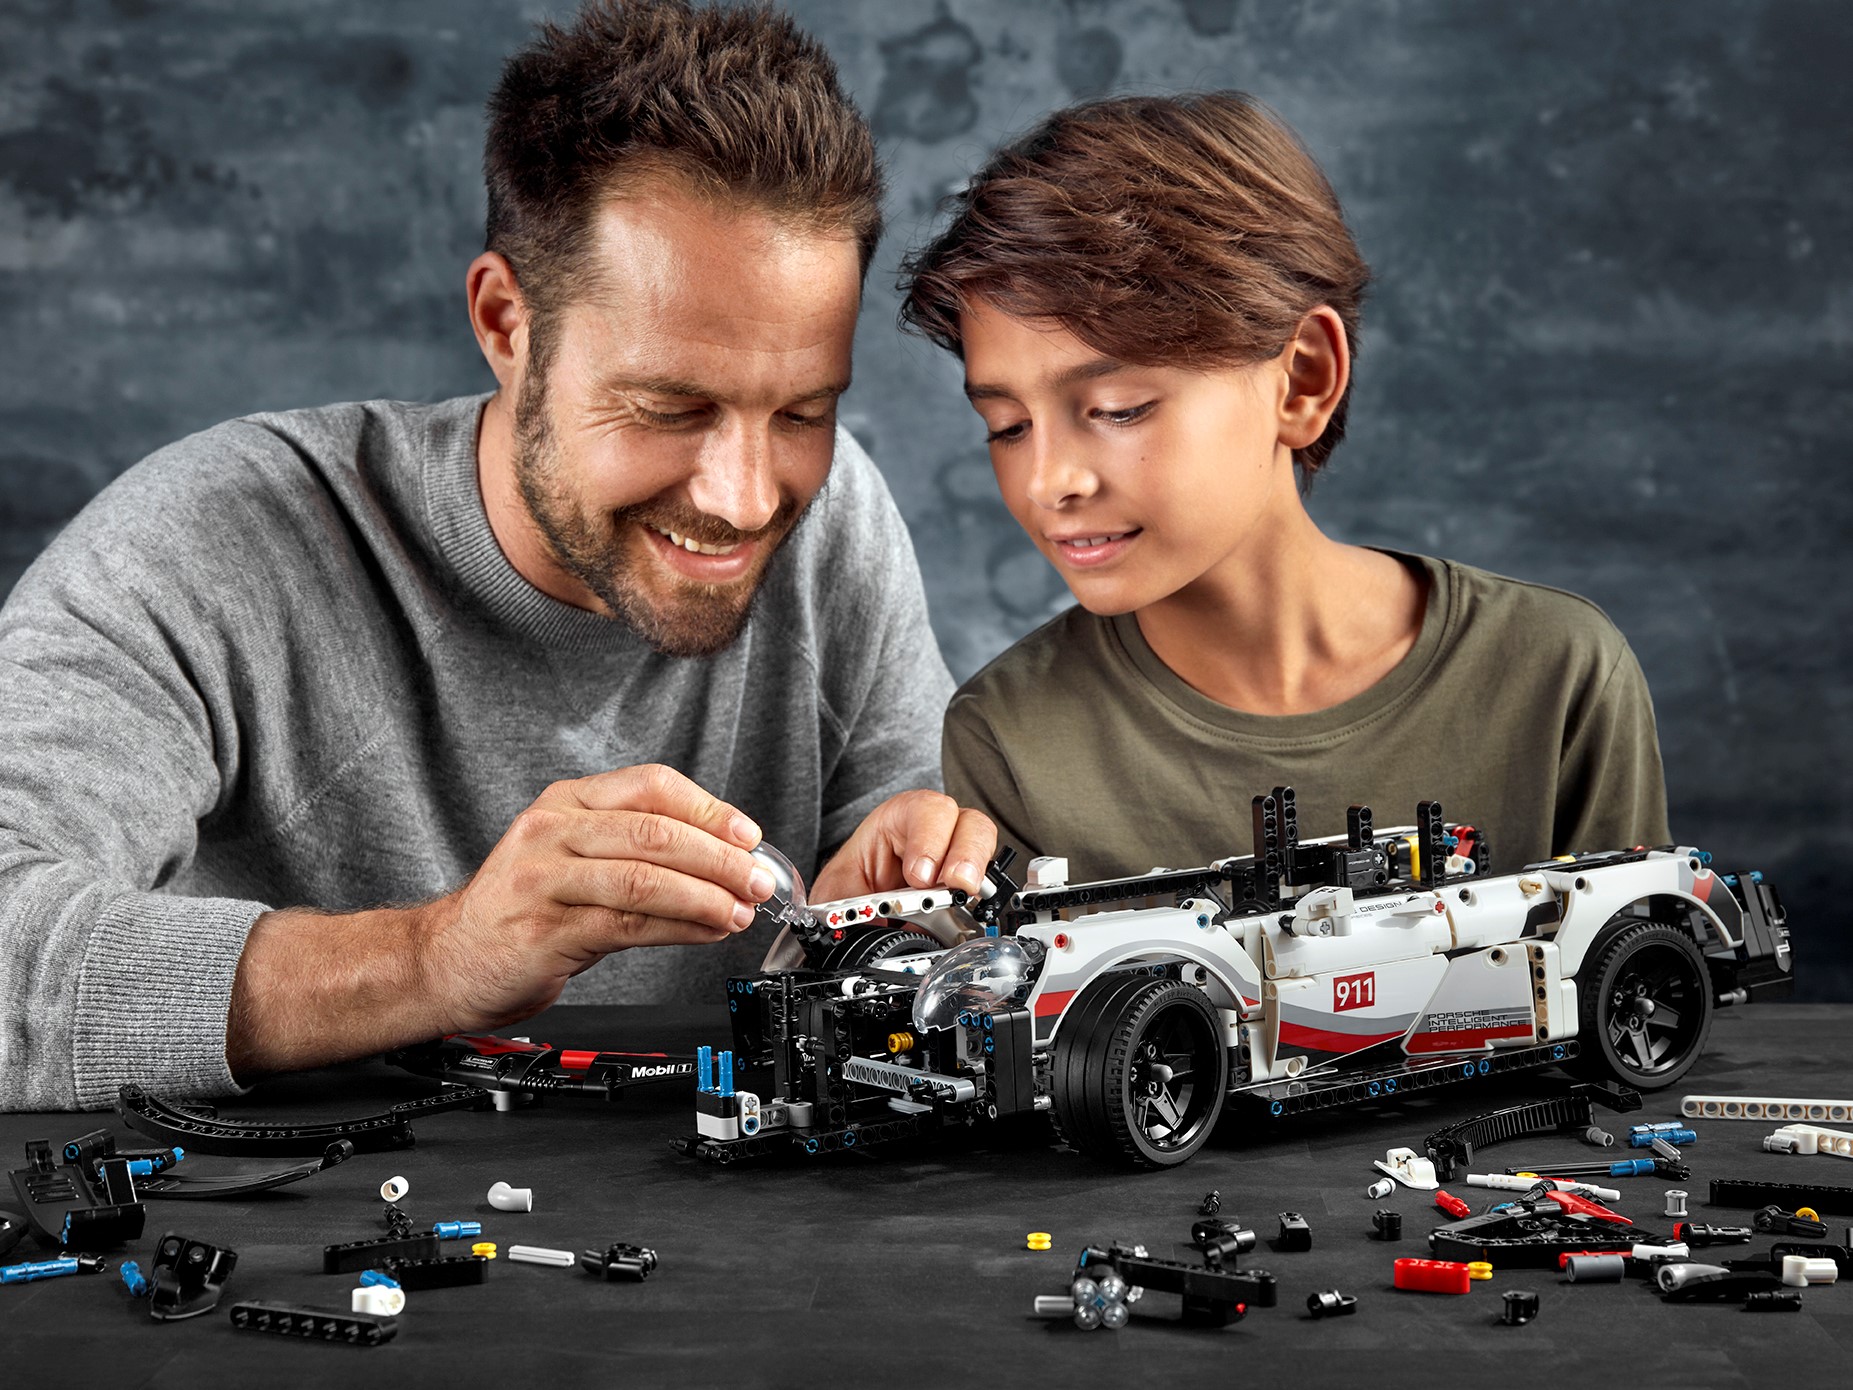  for Lego 42096 Technic Porsche 911 RSR Super Motor and Remote  Control Upgrade Kit, 3 Motors, APP 4 Modes Control, Metal Shaft, Power  Functions Motor Set Compatible with Lego 42096(Model not